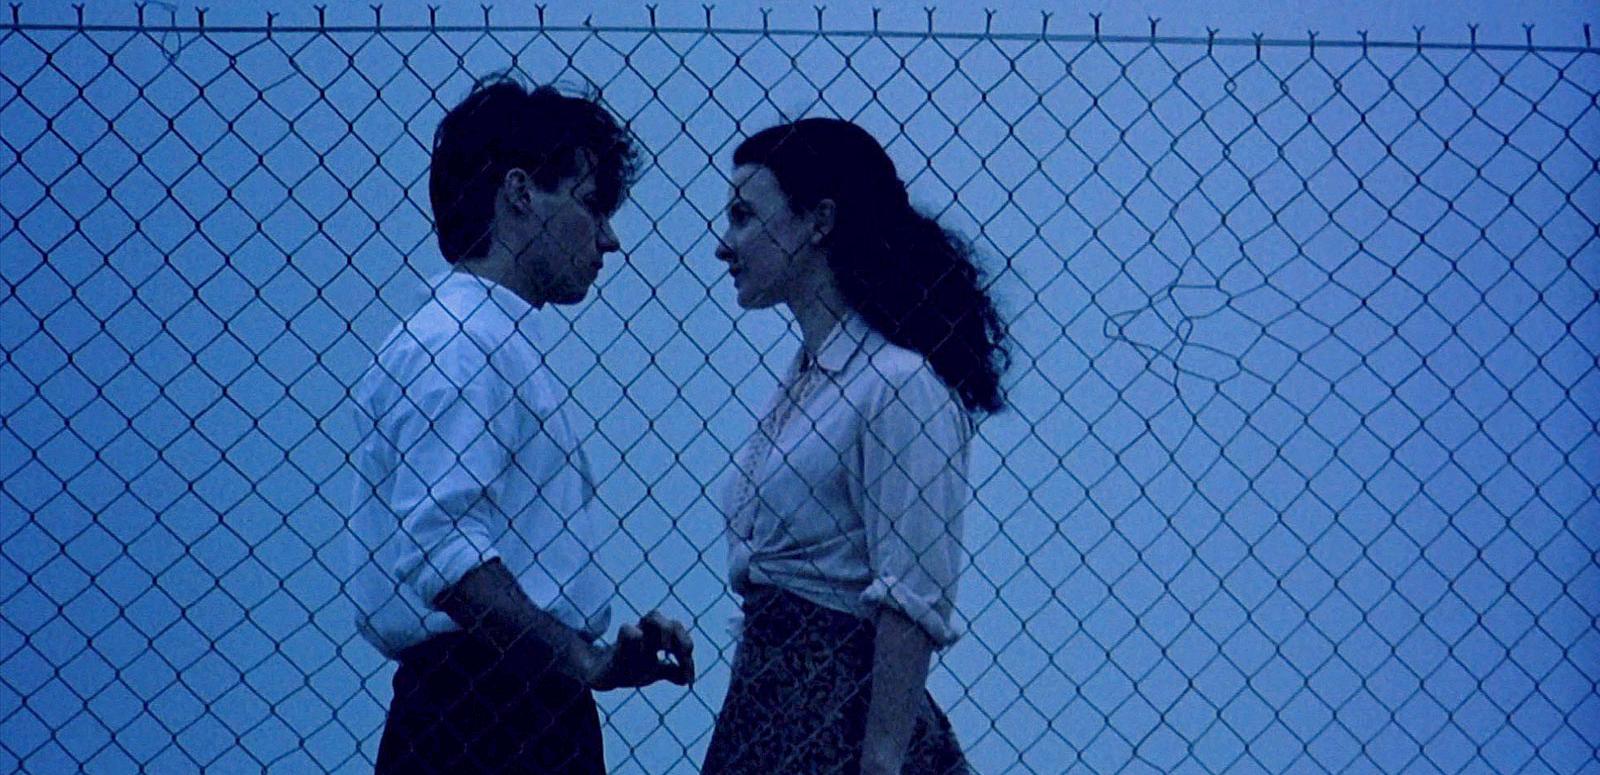 Paul Mercurio and Tara Morice in scene from the film Strictly Ballroom. They are facing each other in front of a wire fence. The time of day seems to be early evening. 